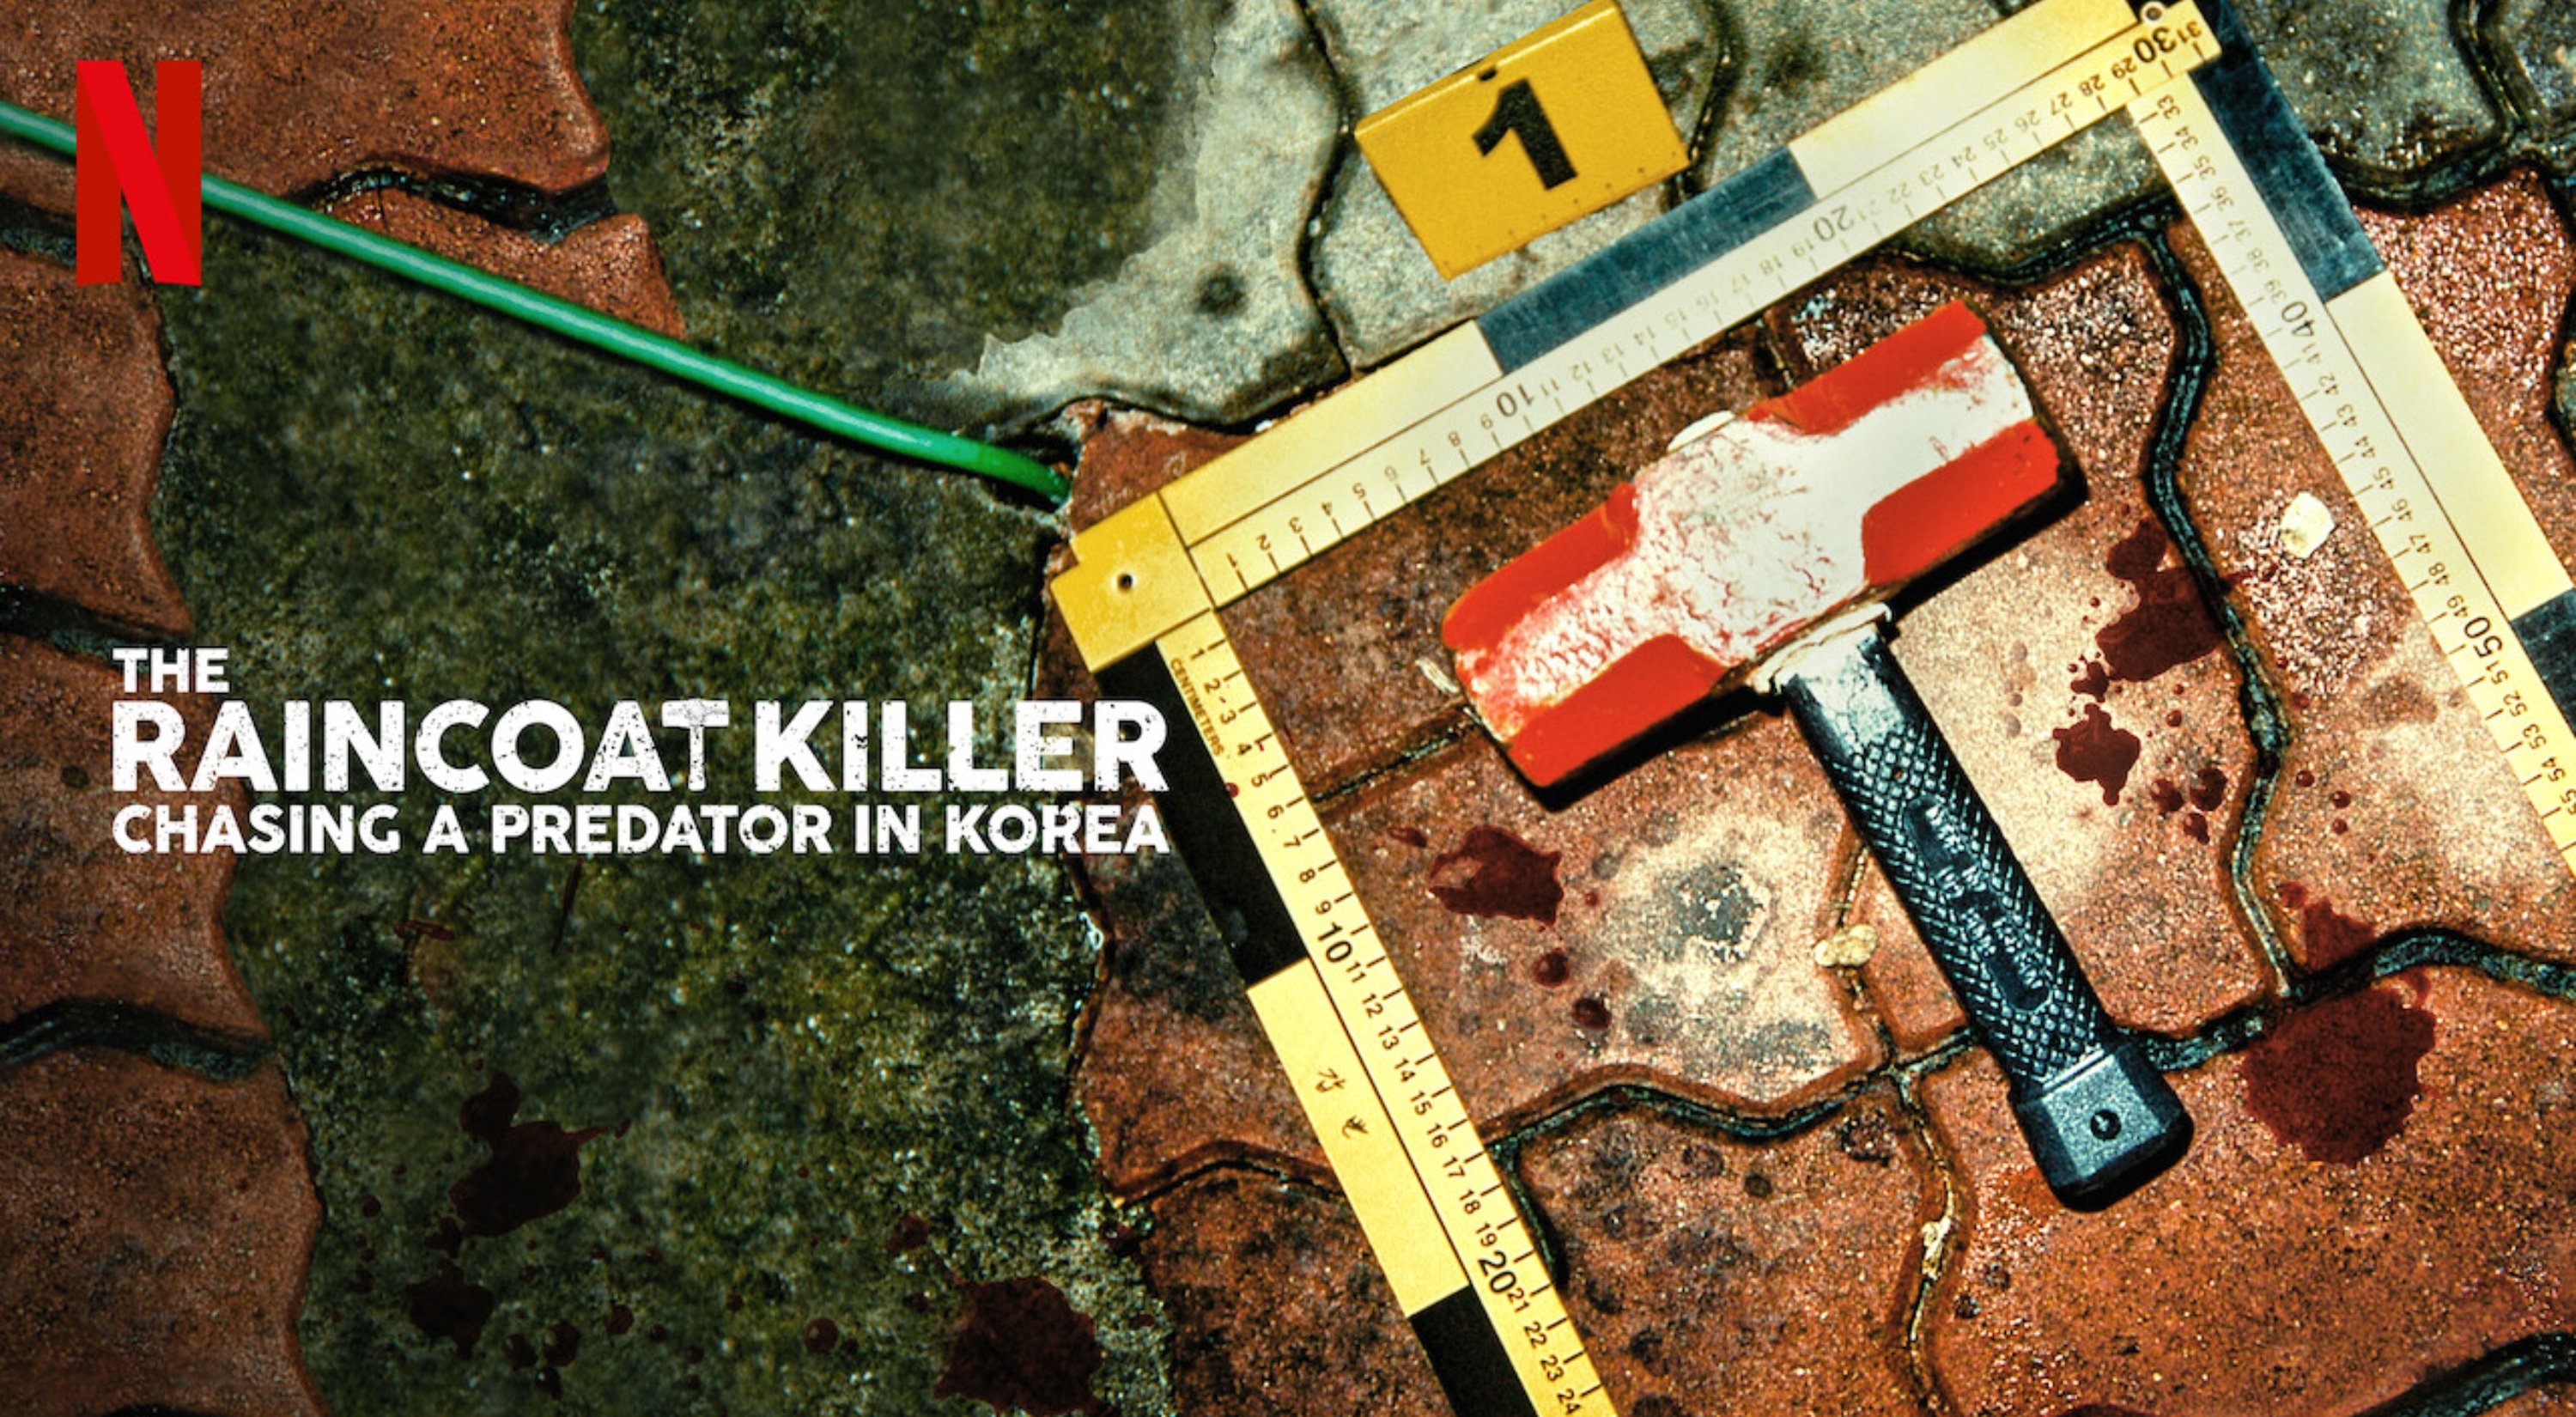 'The Raincoat Killer: Chasing a Predator in Korea' Netflix promo poster with metal hopper and measuring tape